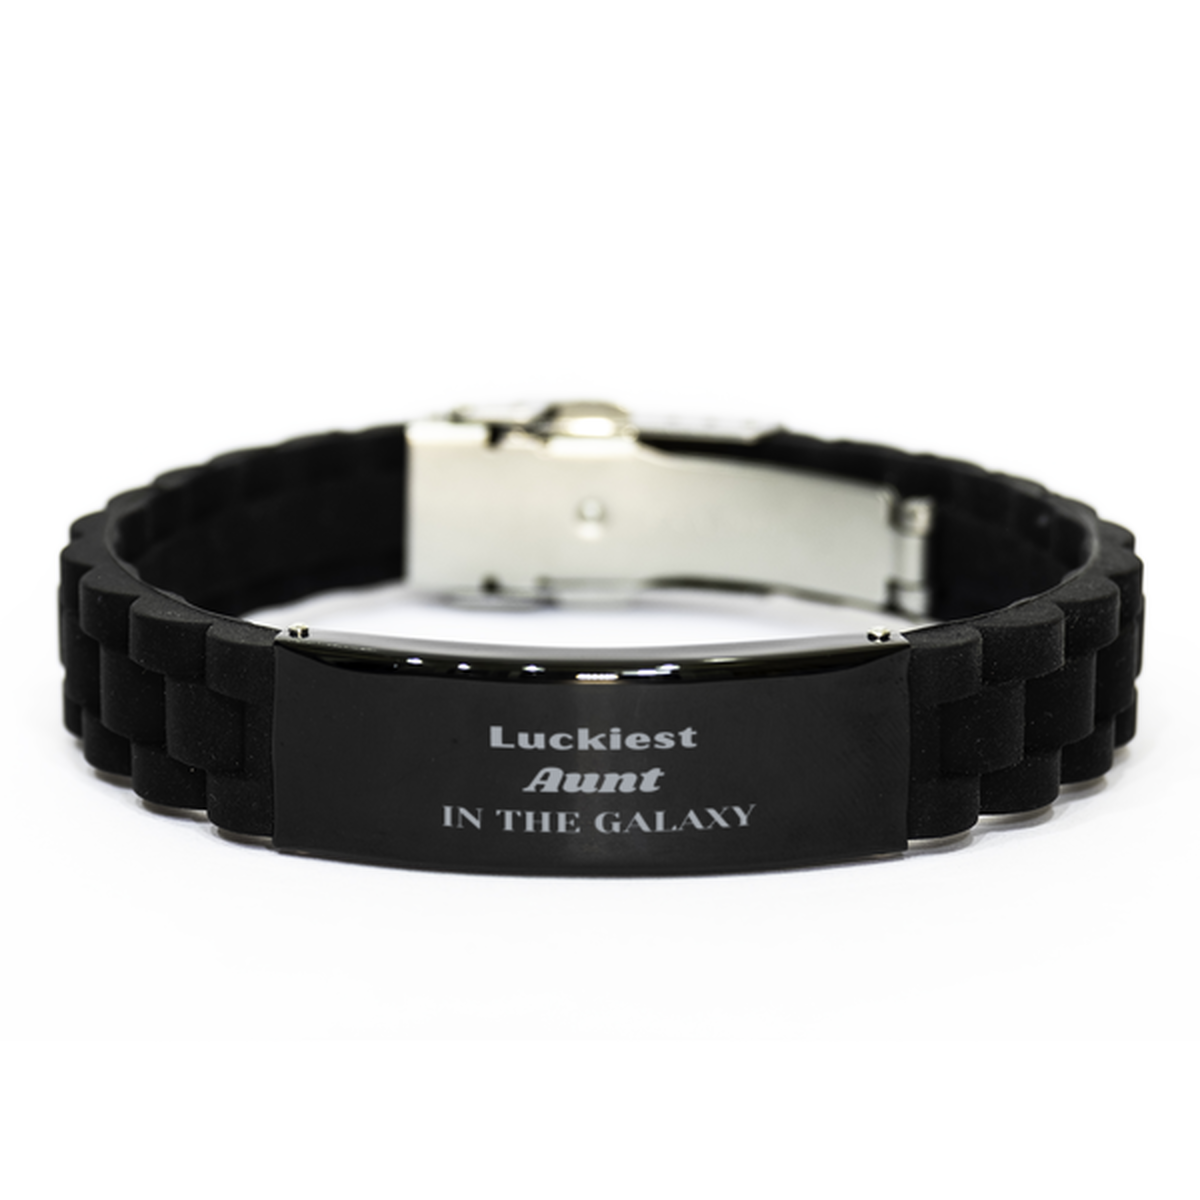 Luckiest Aunt in the Galaxy, To My Aunt Engraved Gifts, Christmas Aunt Black Glidelock Clasp Bracelet Gifts, X-mas Birthday Unique Gifts For Aunt Men Women